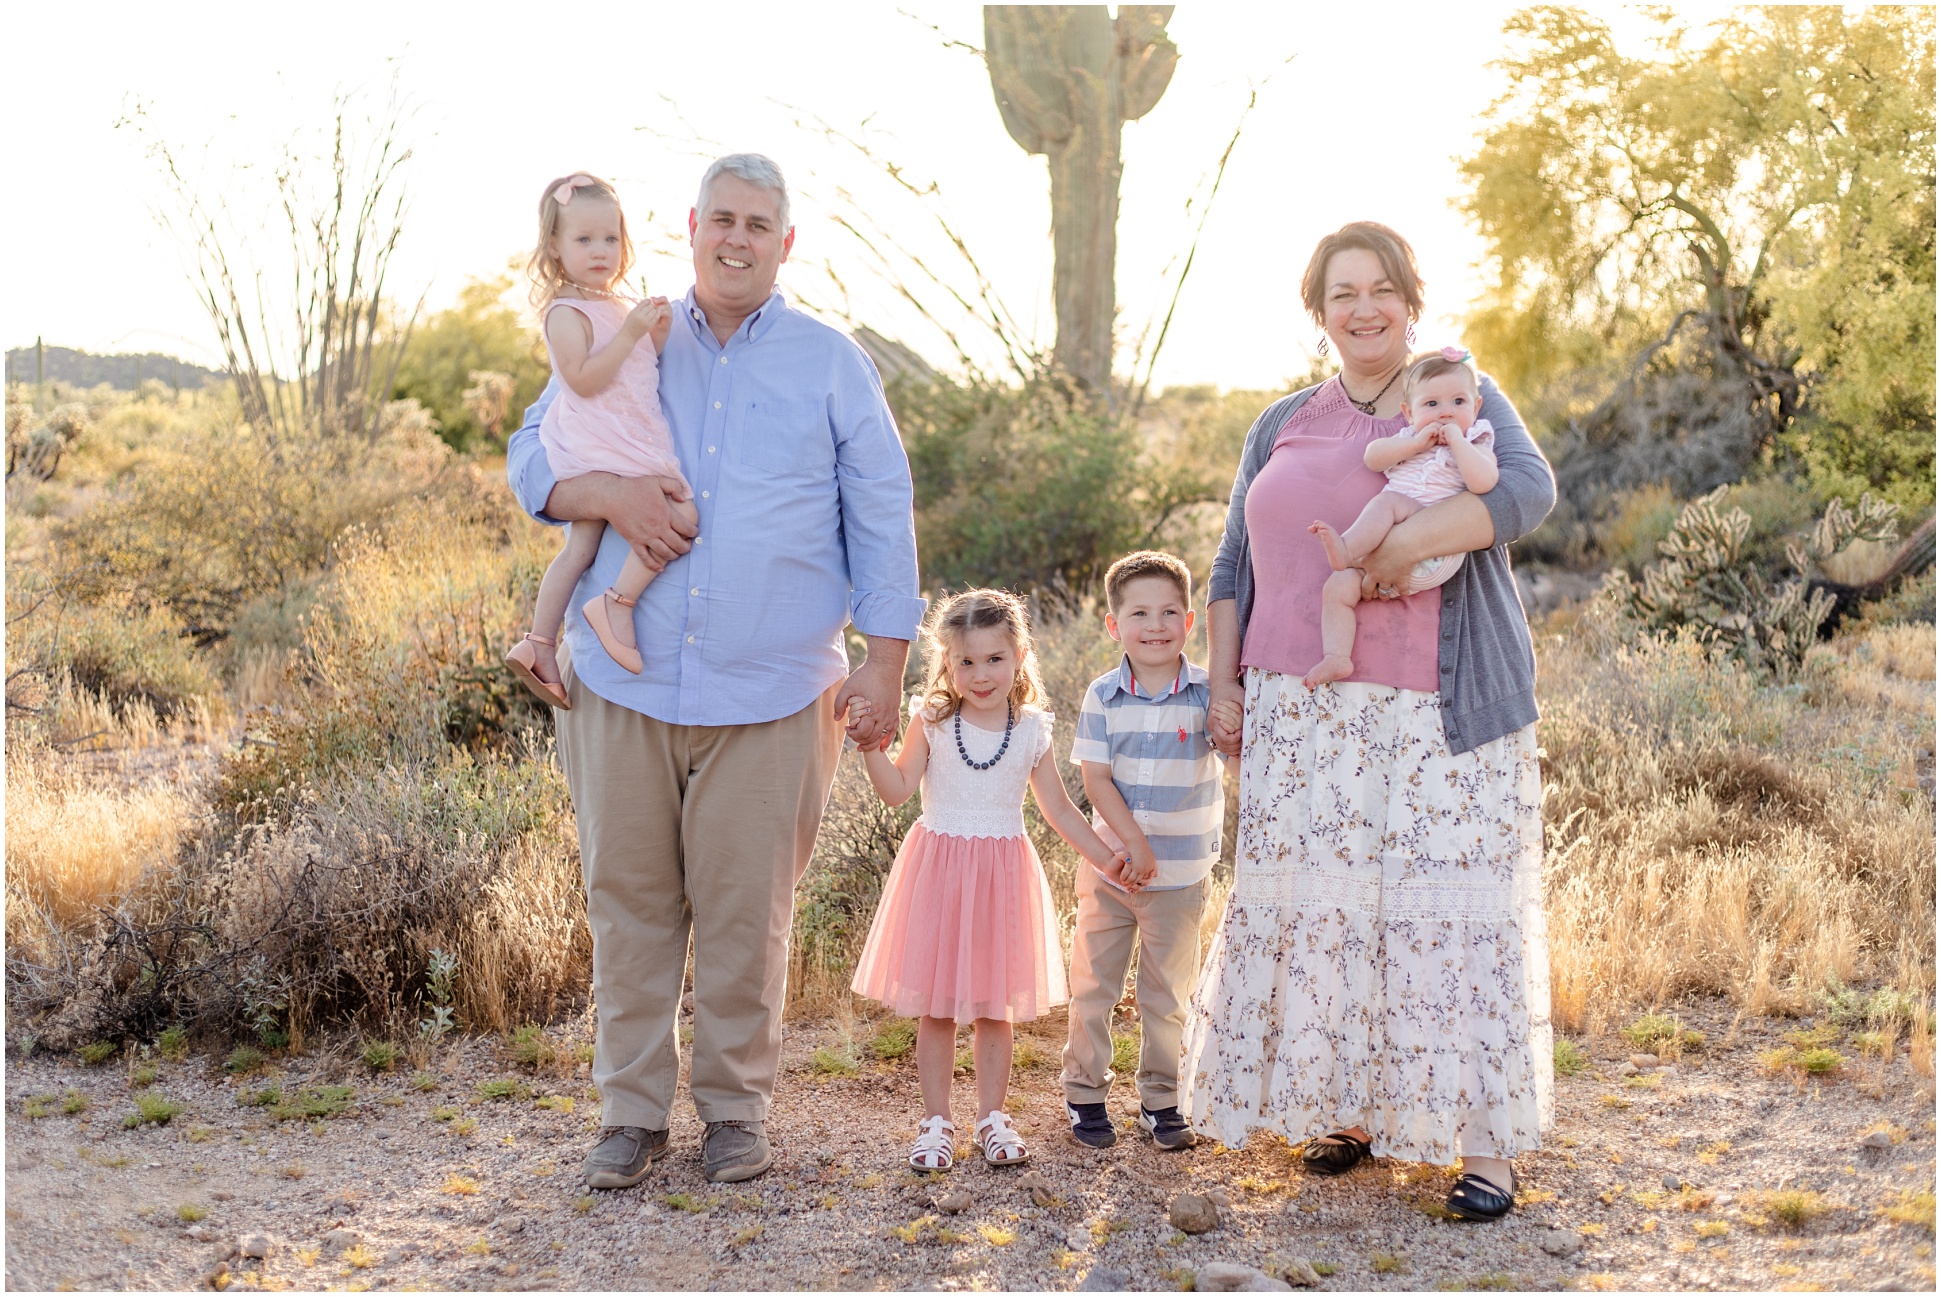 Grandparents and their grandchildren standing together in front of a saguaro cacti